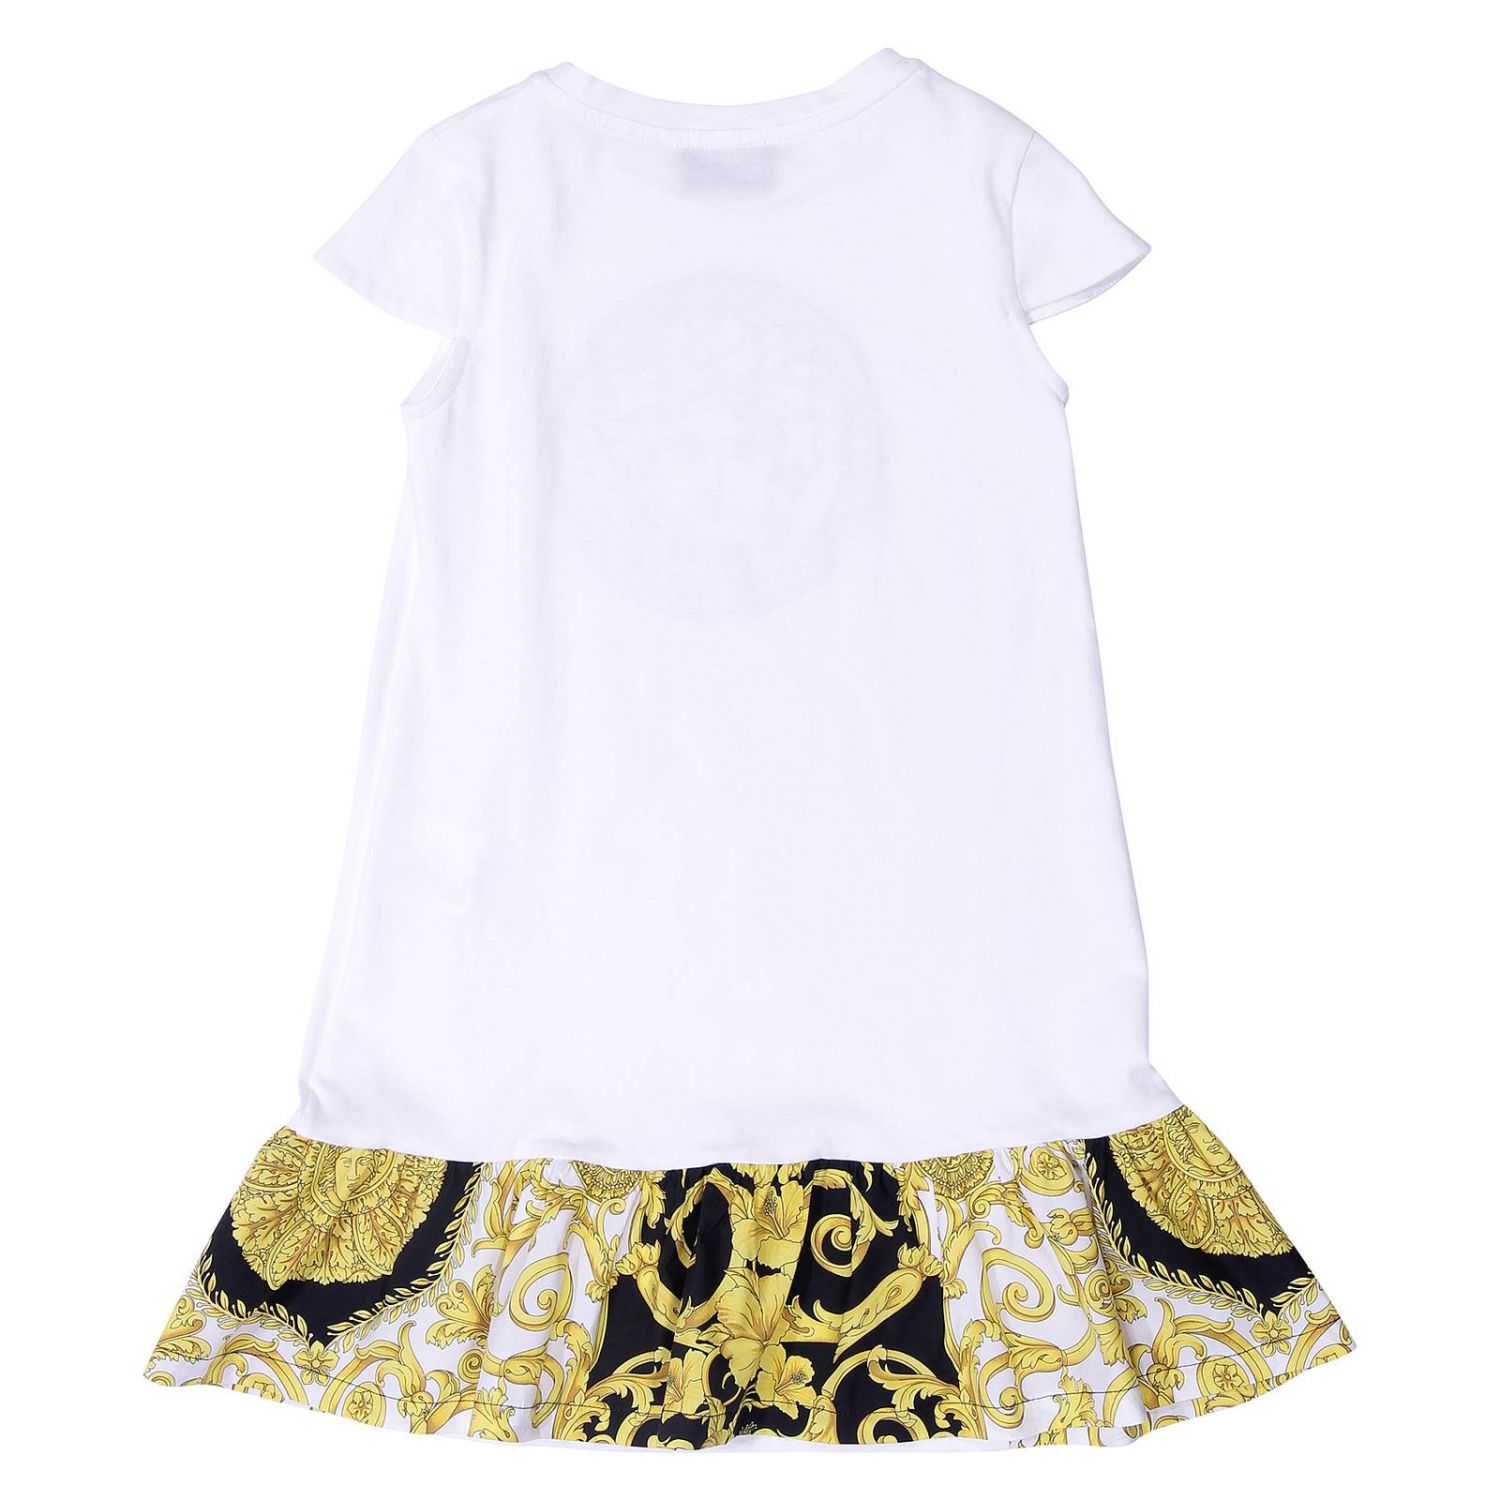 Young Versace Outlet: dress for girls - White | Young Versace dress ...